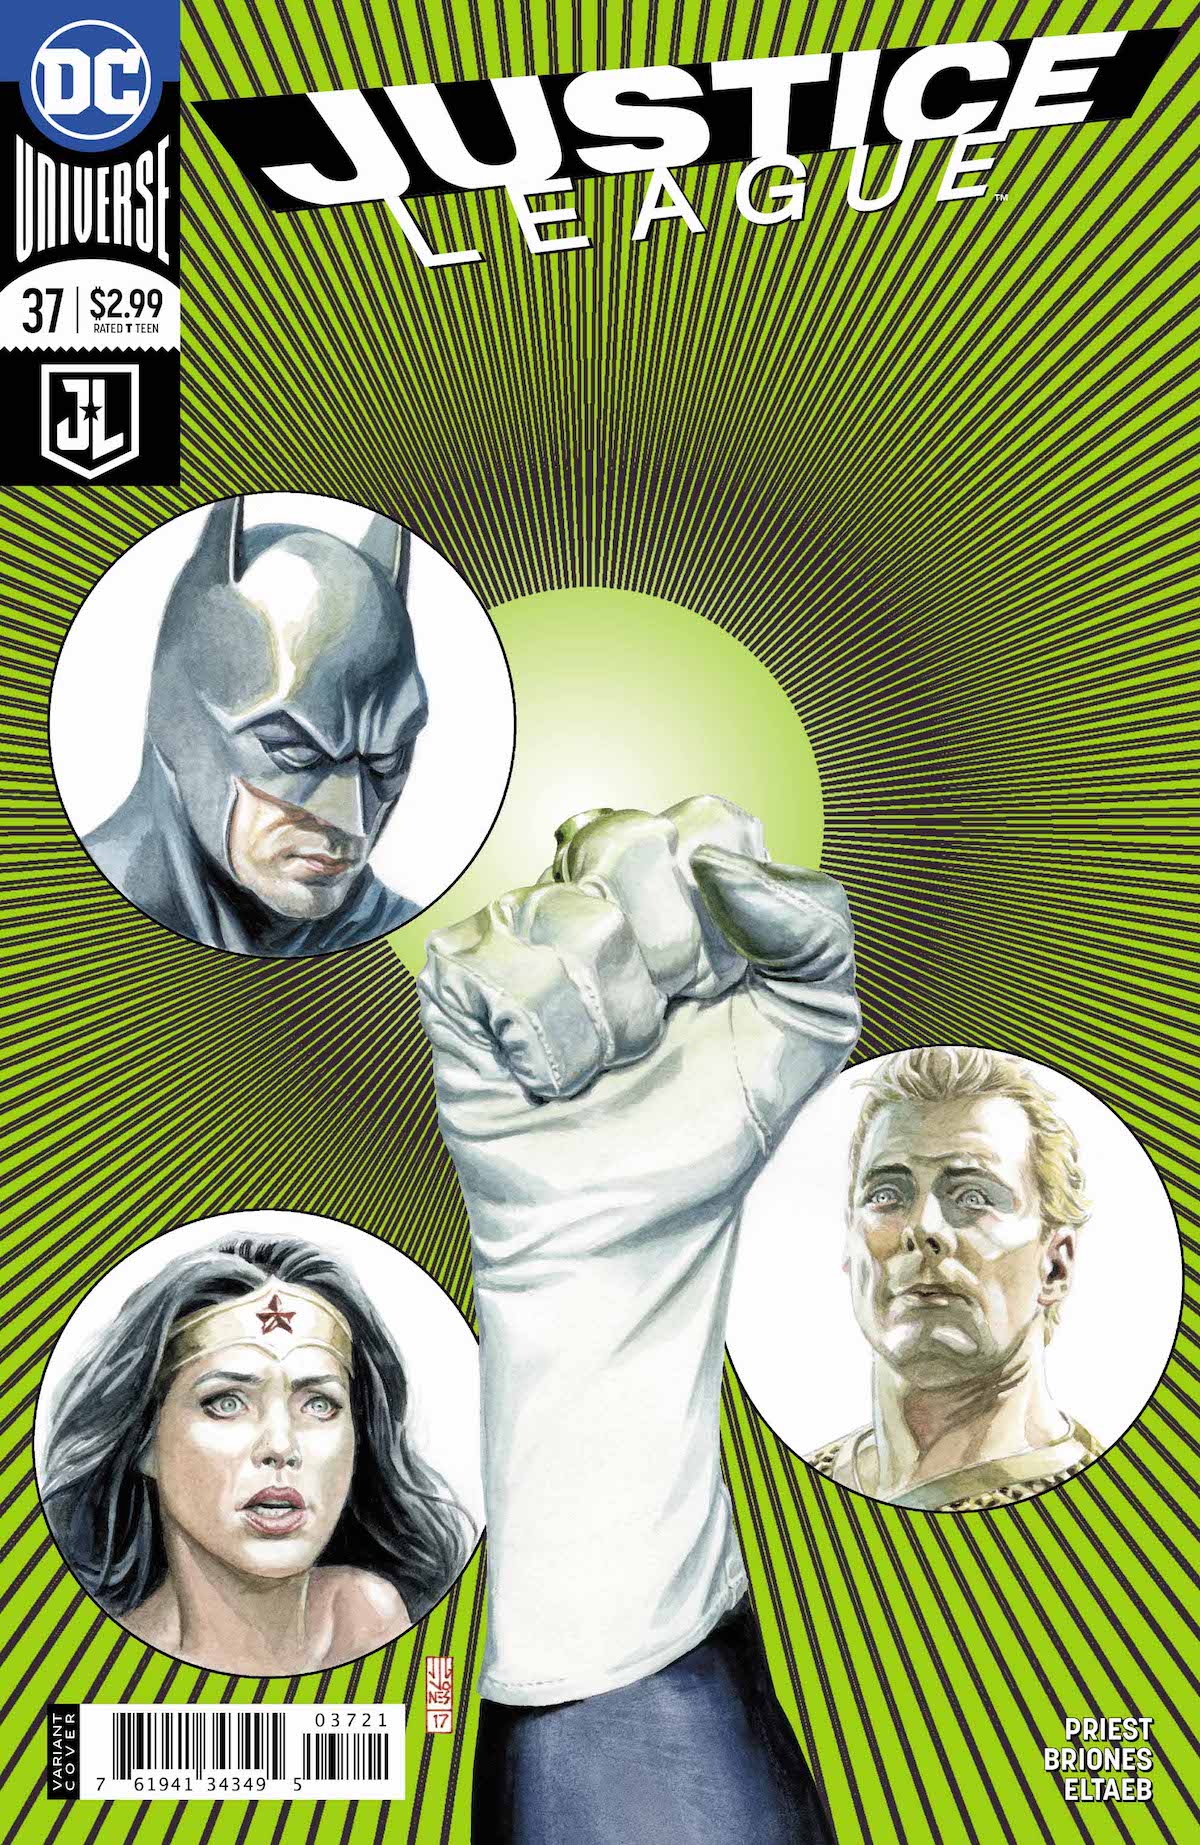 Justice League #37 variant cover